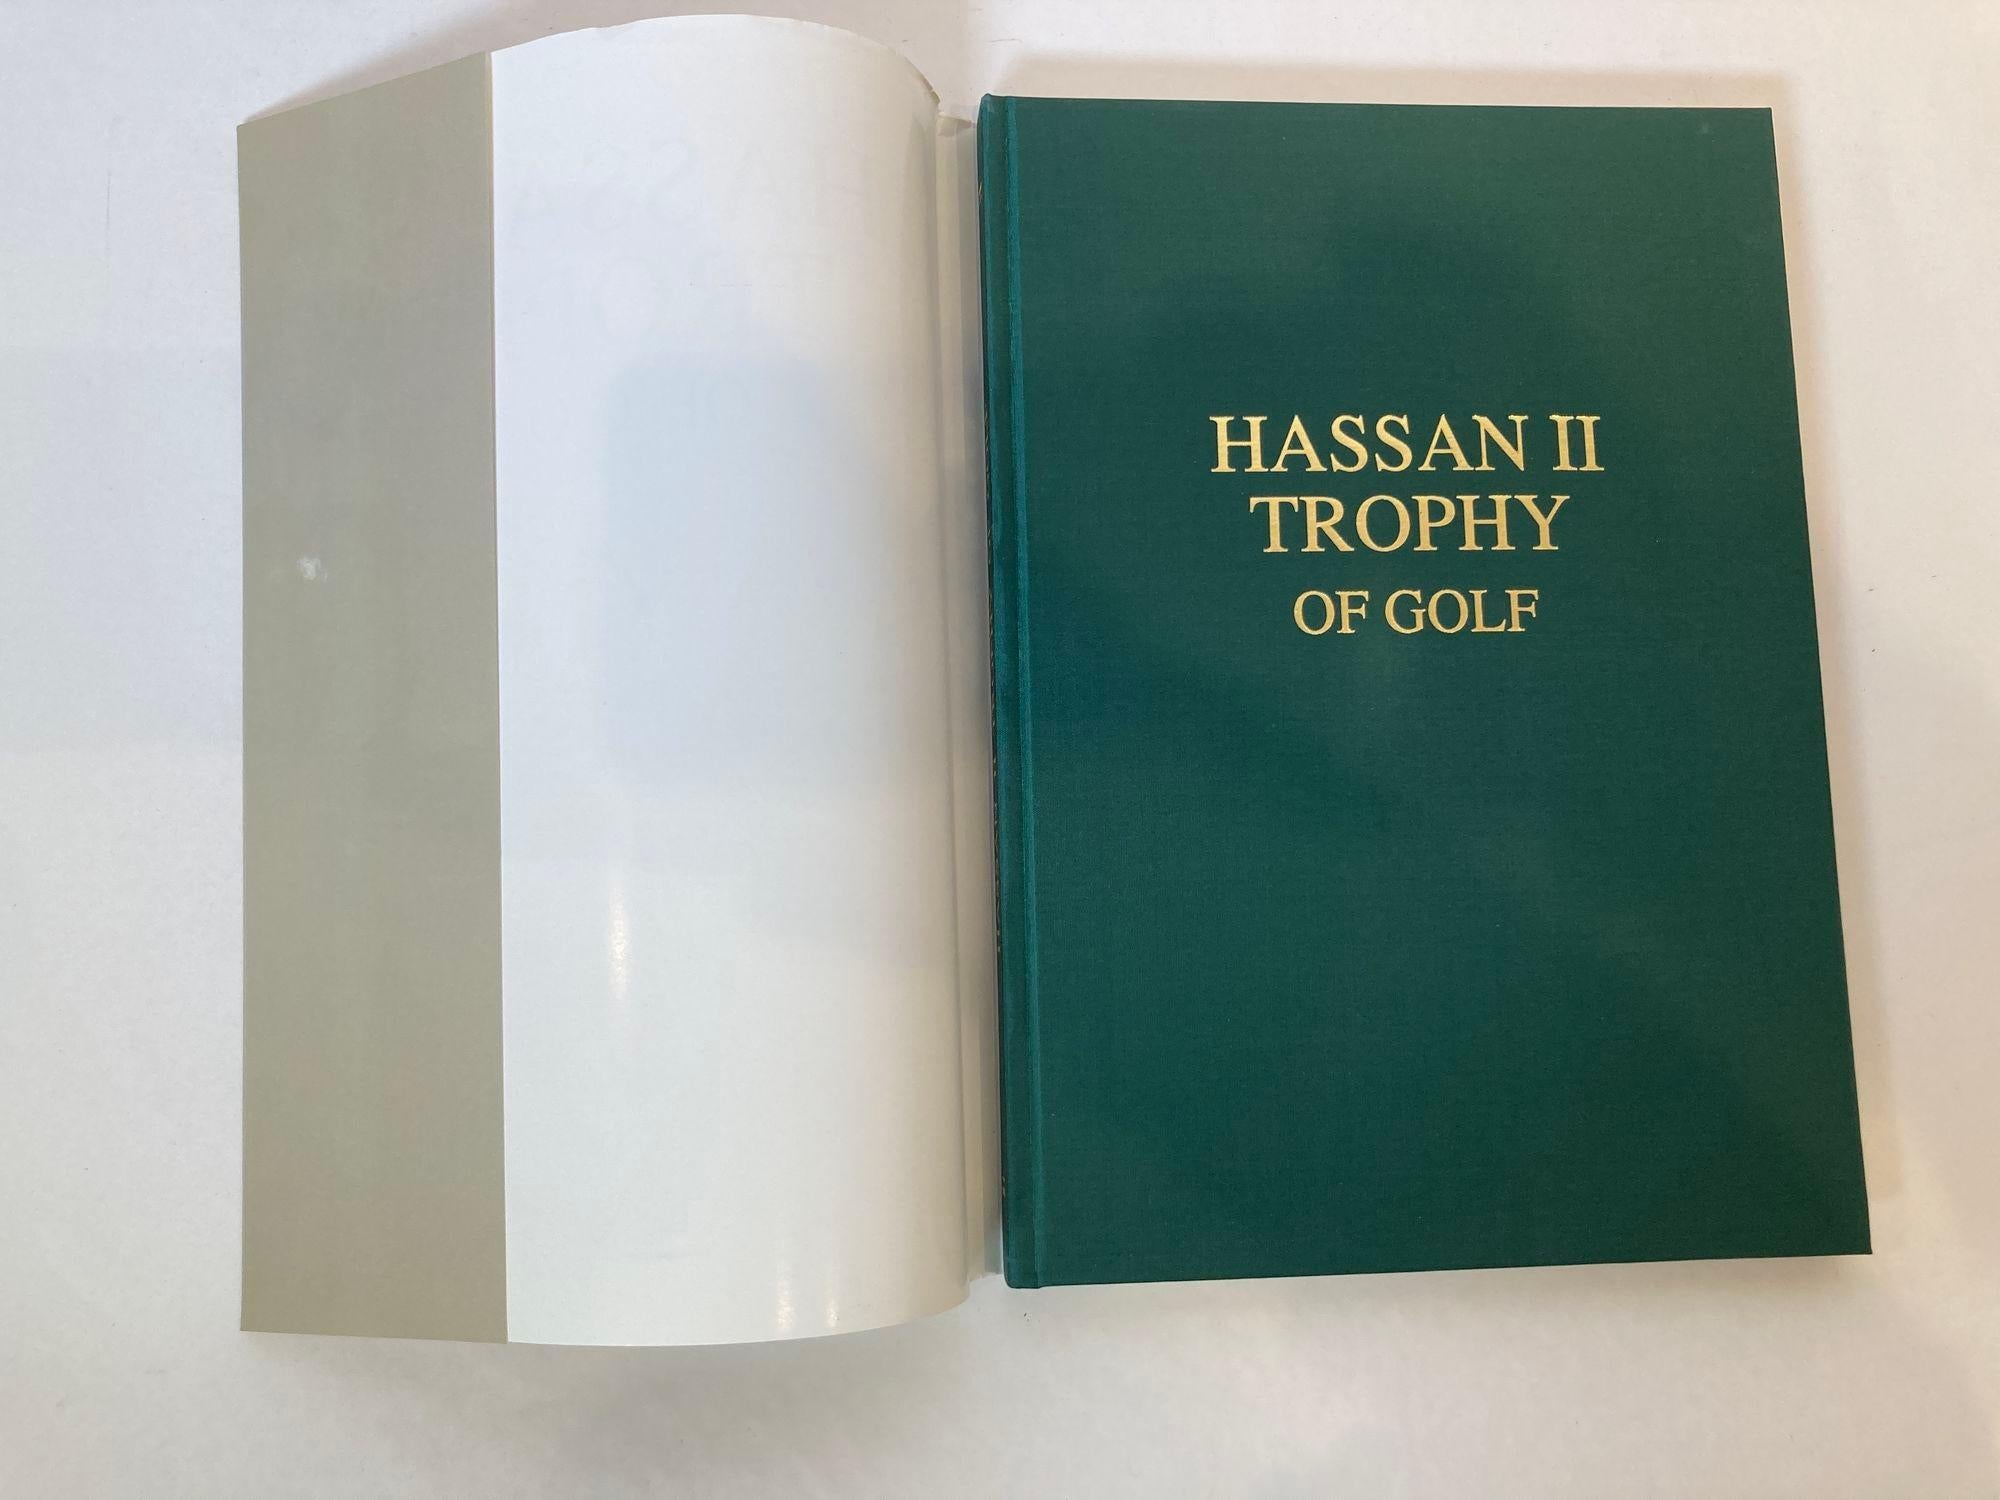 Hassan II Trophy of Golf Audisio, Silvia Published by LAK International, Casablanca, Morocco 1993.
Hardcover book with dust jacket.
Title: Hassan II Trophy of Golf
Publisher: LAK International, Casablanca
Publication Date: 1993
Binding: Green